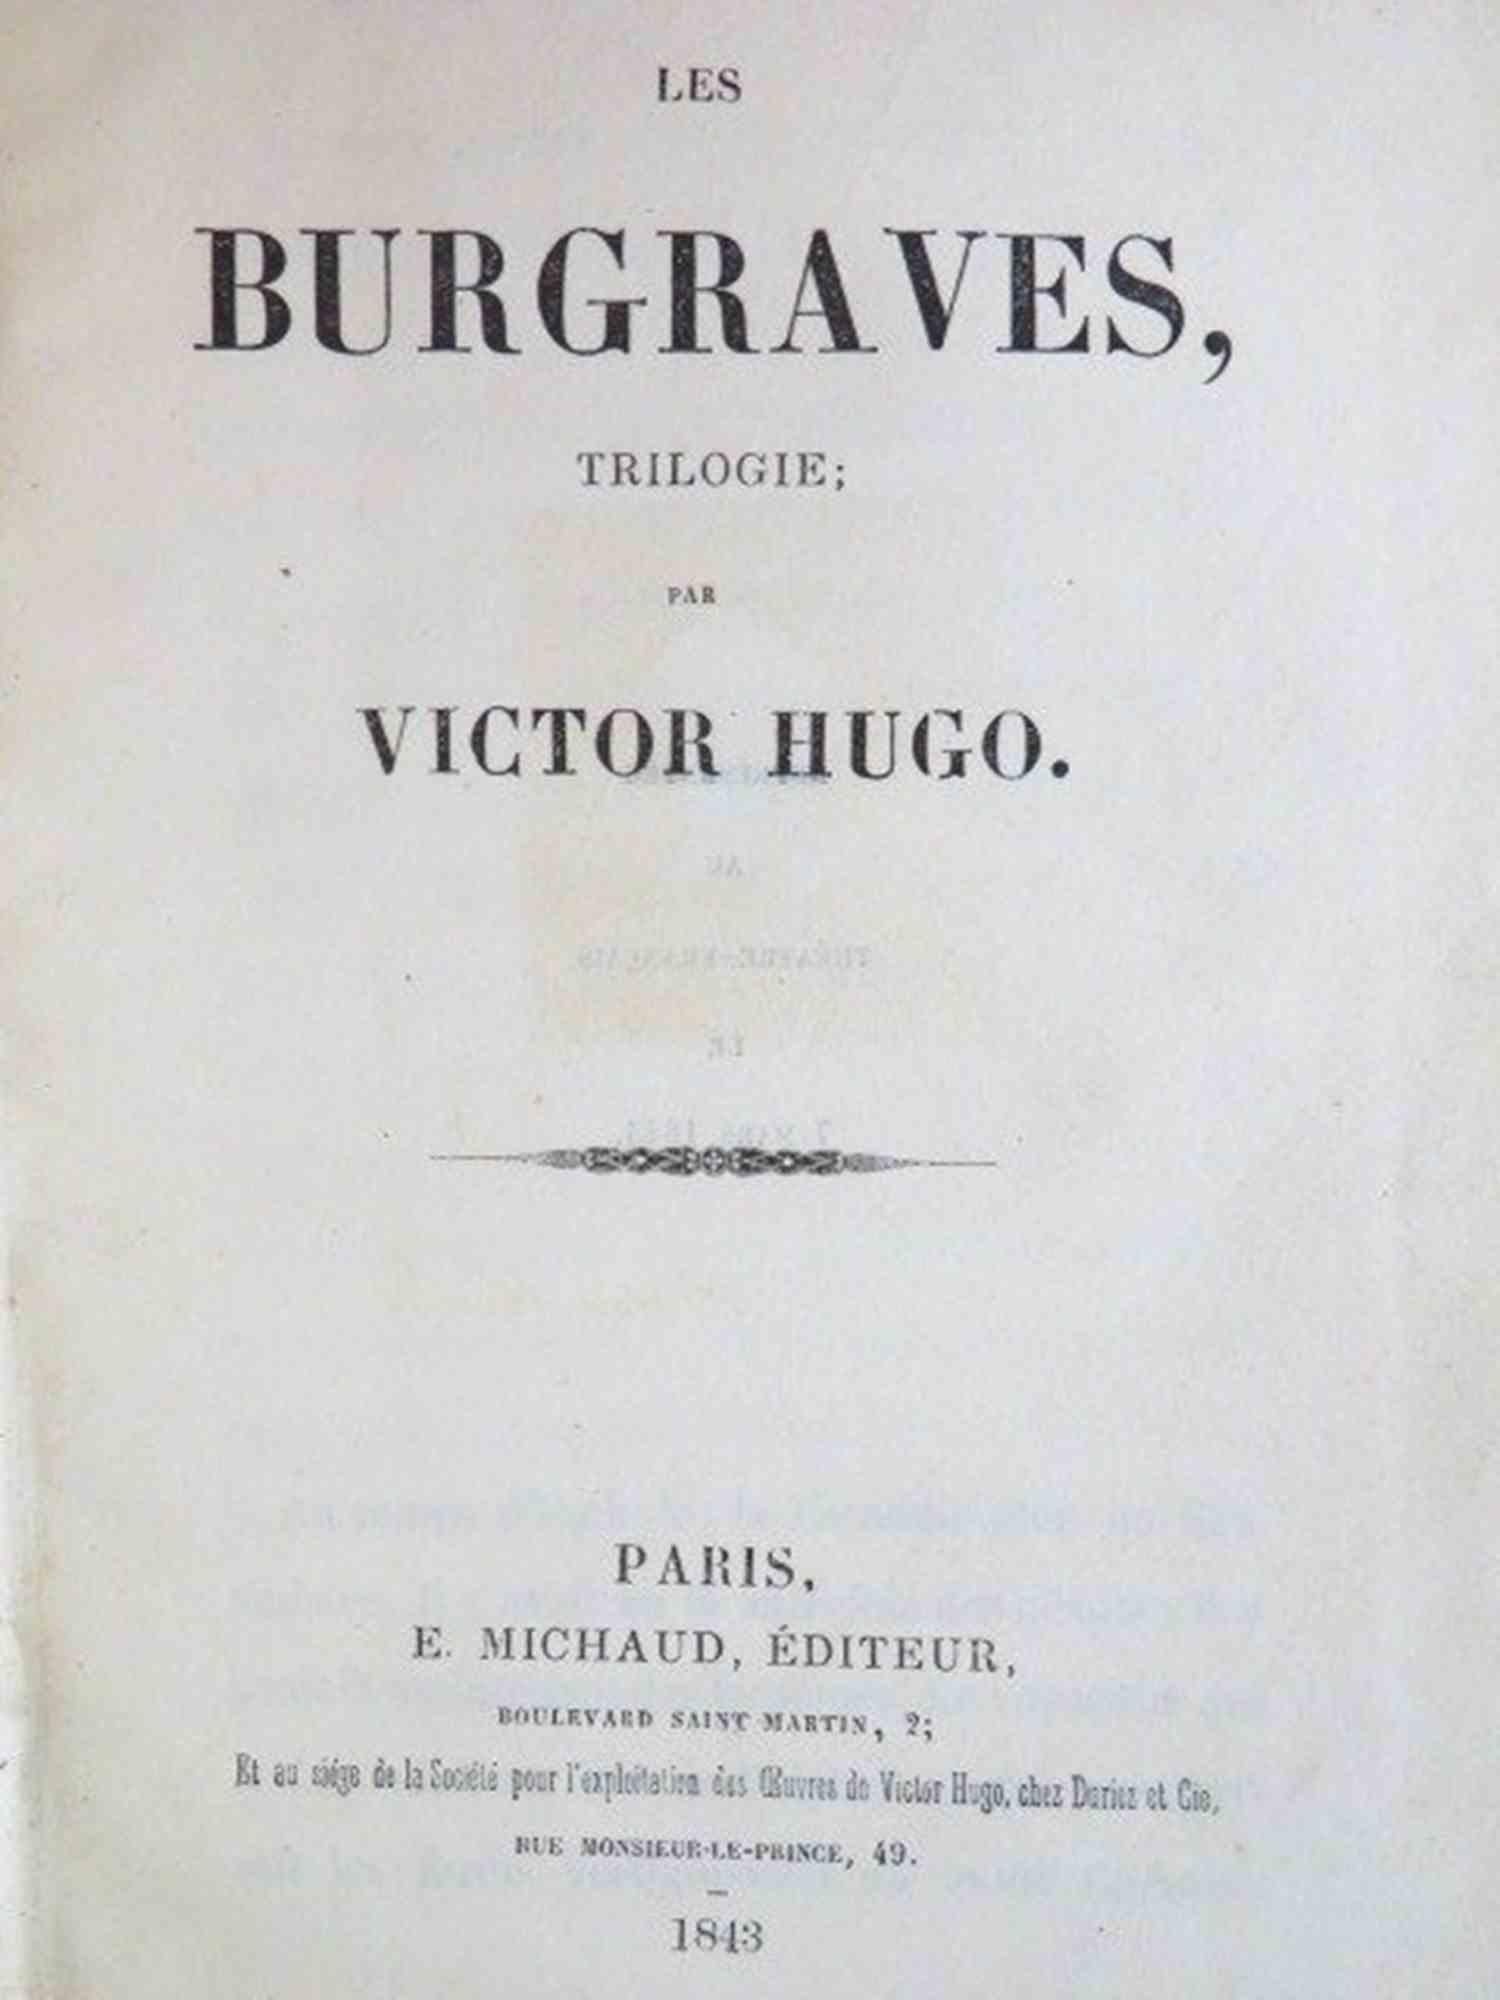 Les Burgraves, une trilogie is a rare book by Victor Hugo published in 1843.

Edited by Michaud -Paris

Original edition in a coeval full parchment binding.  

in-8° (20.5 x 13.5 cm); xxix-(1)-188pages.

Etched portrait of Hugo by Nanteuil – Ex